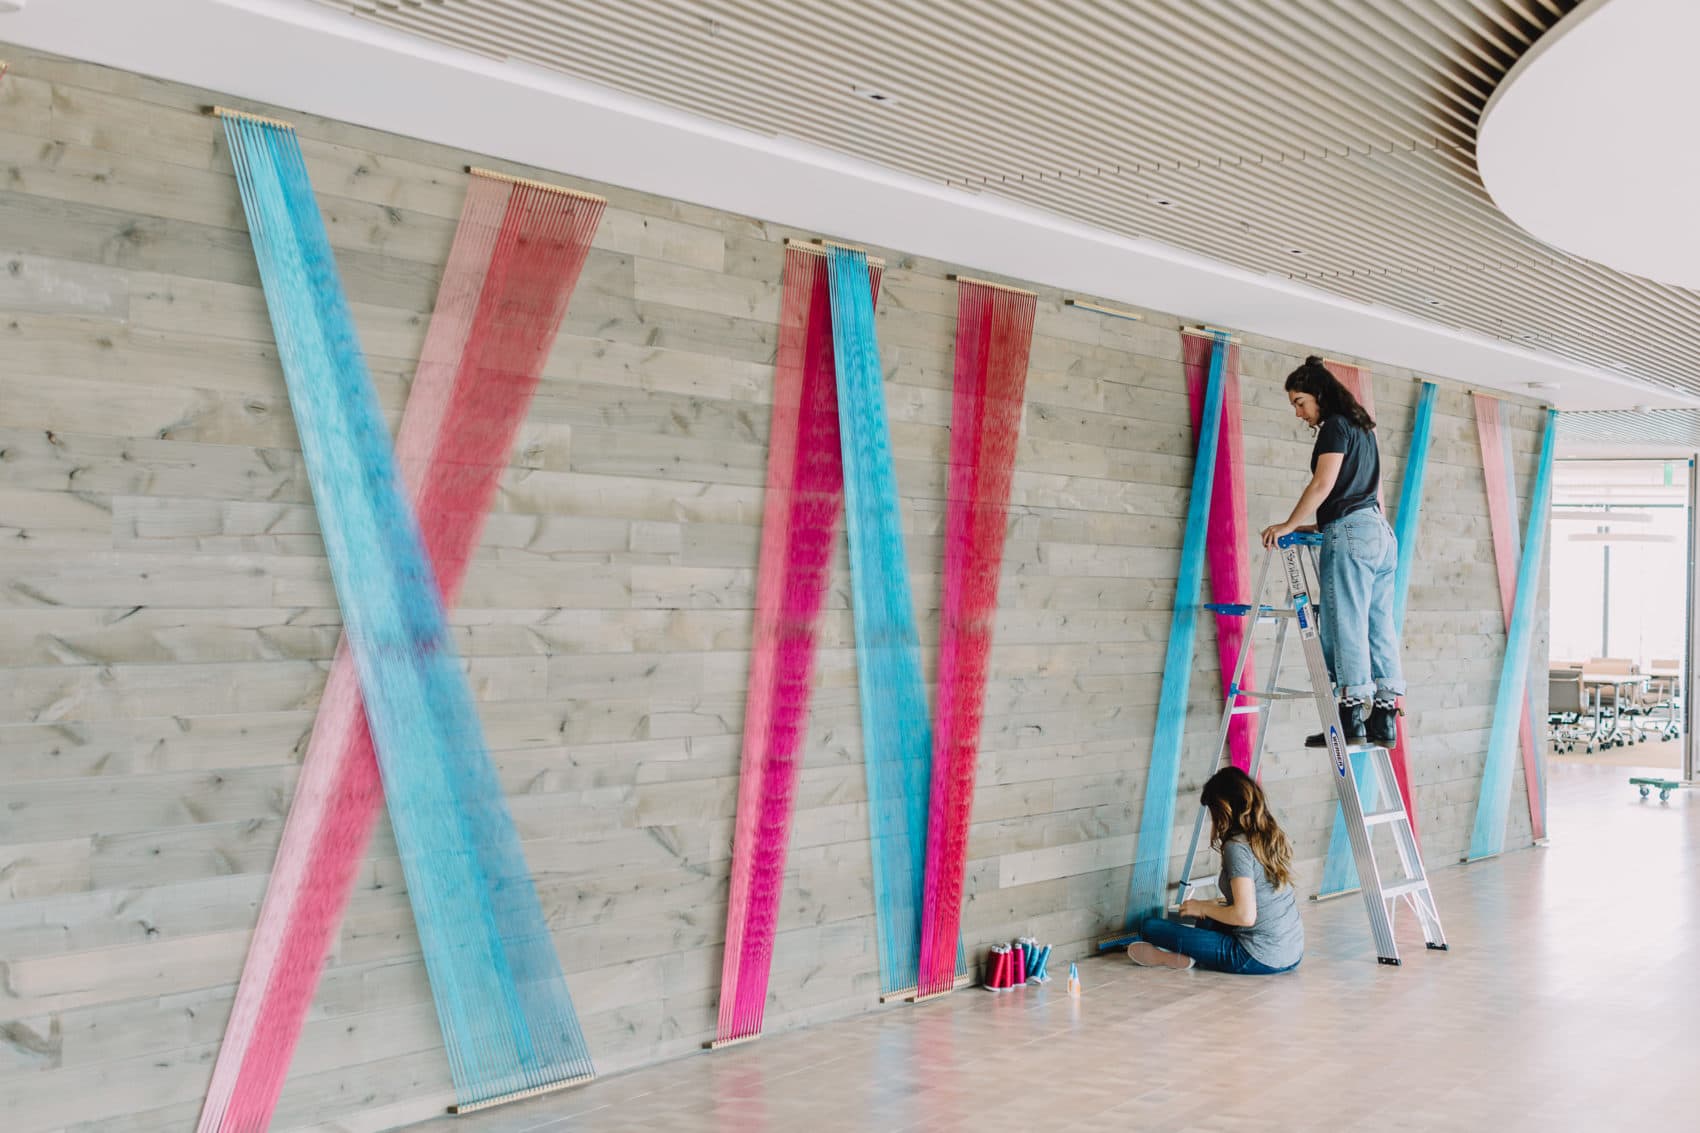 Artist Rachel Mica Weiss installs her fiber work at the Boston Consulting Group's new headquarters. (Courtesy Nicole Baas)